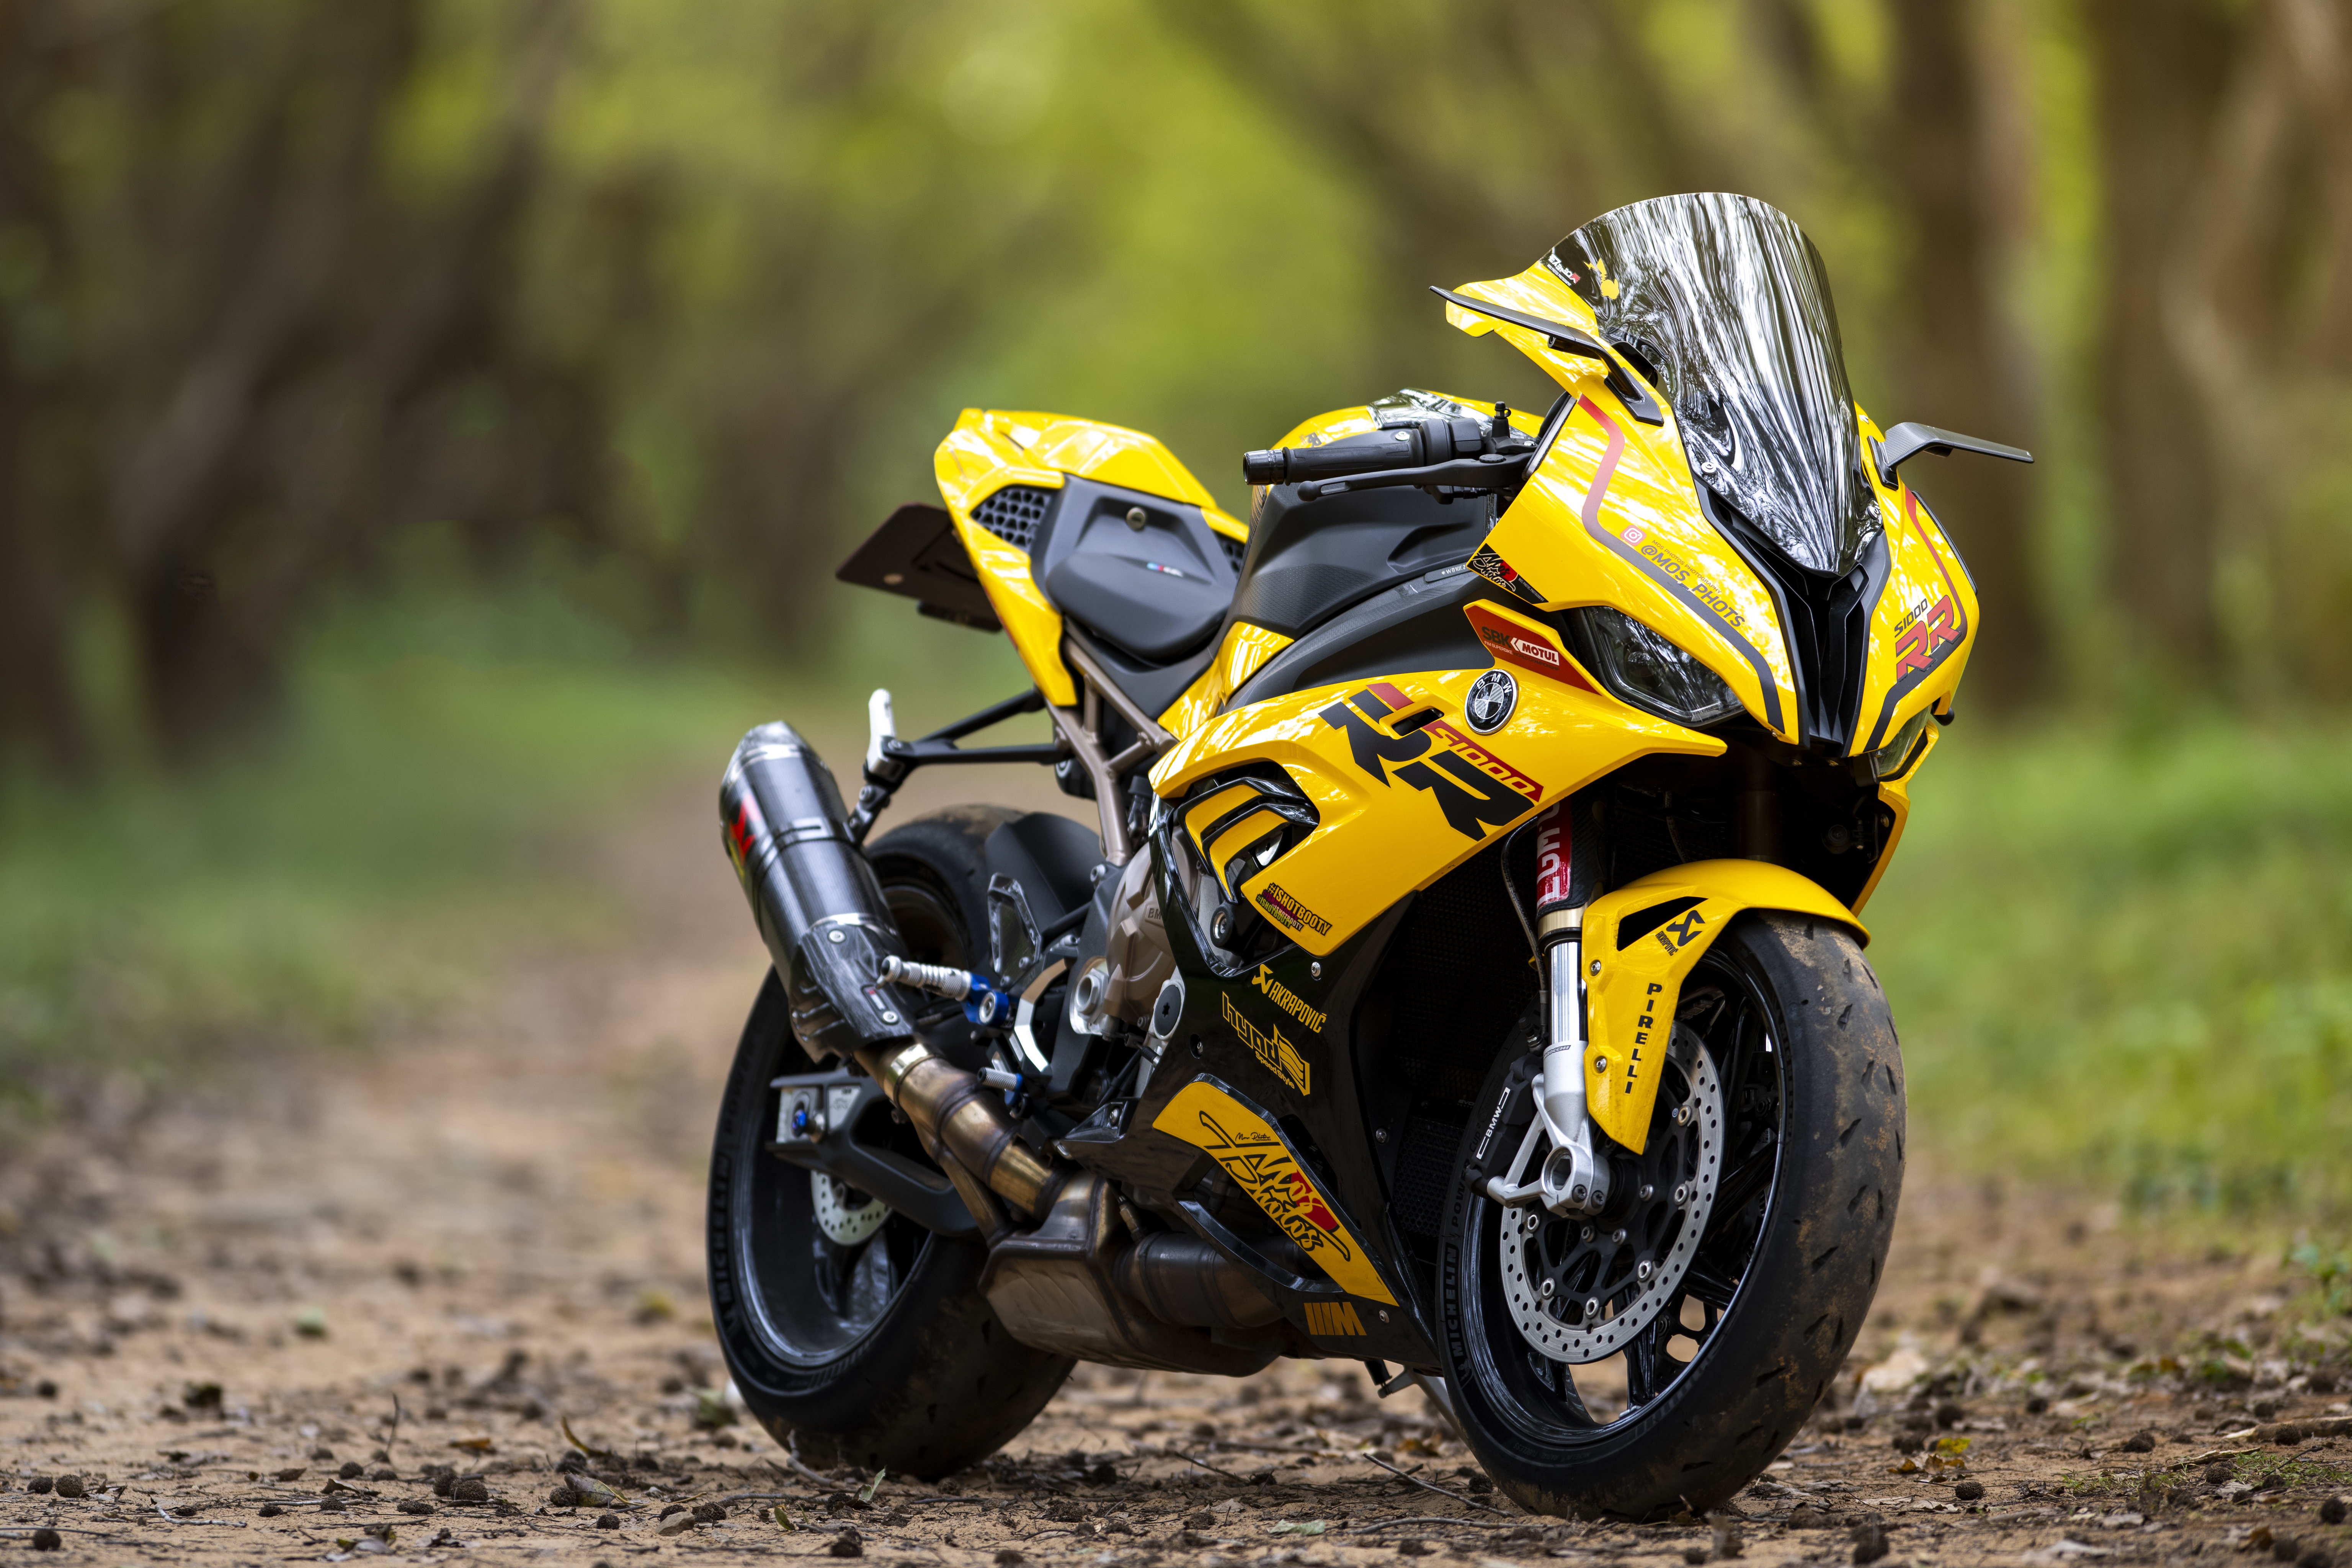 bmw s1000, bmw s1000rr, motorcycle, vehicles, motorcycles